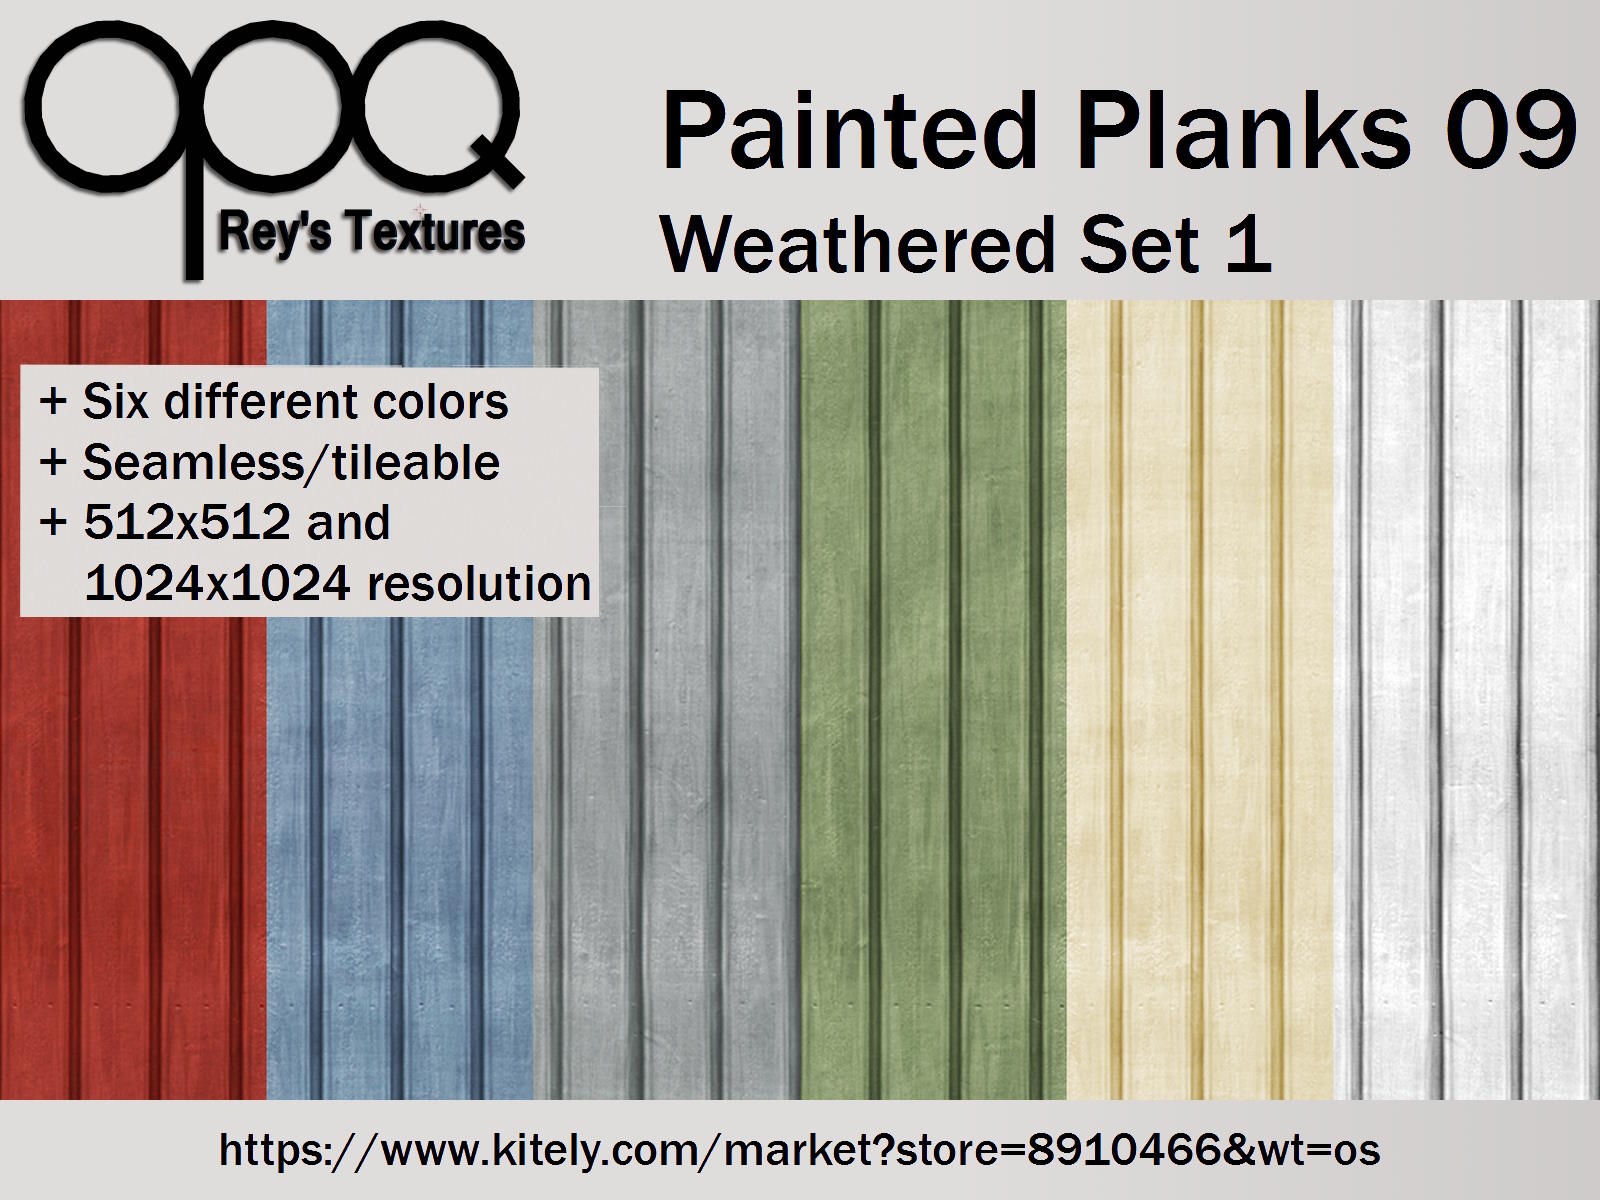 Rey's Painted Planks 09 Weathered Set 1 Poster KM.jpg